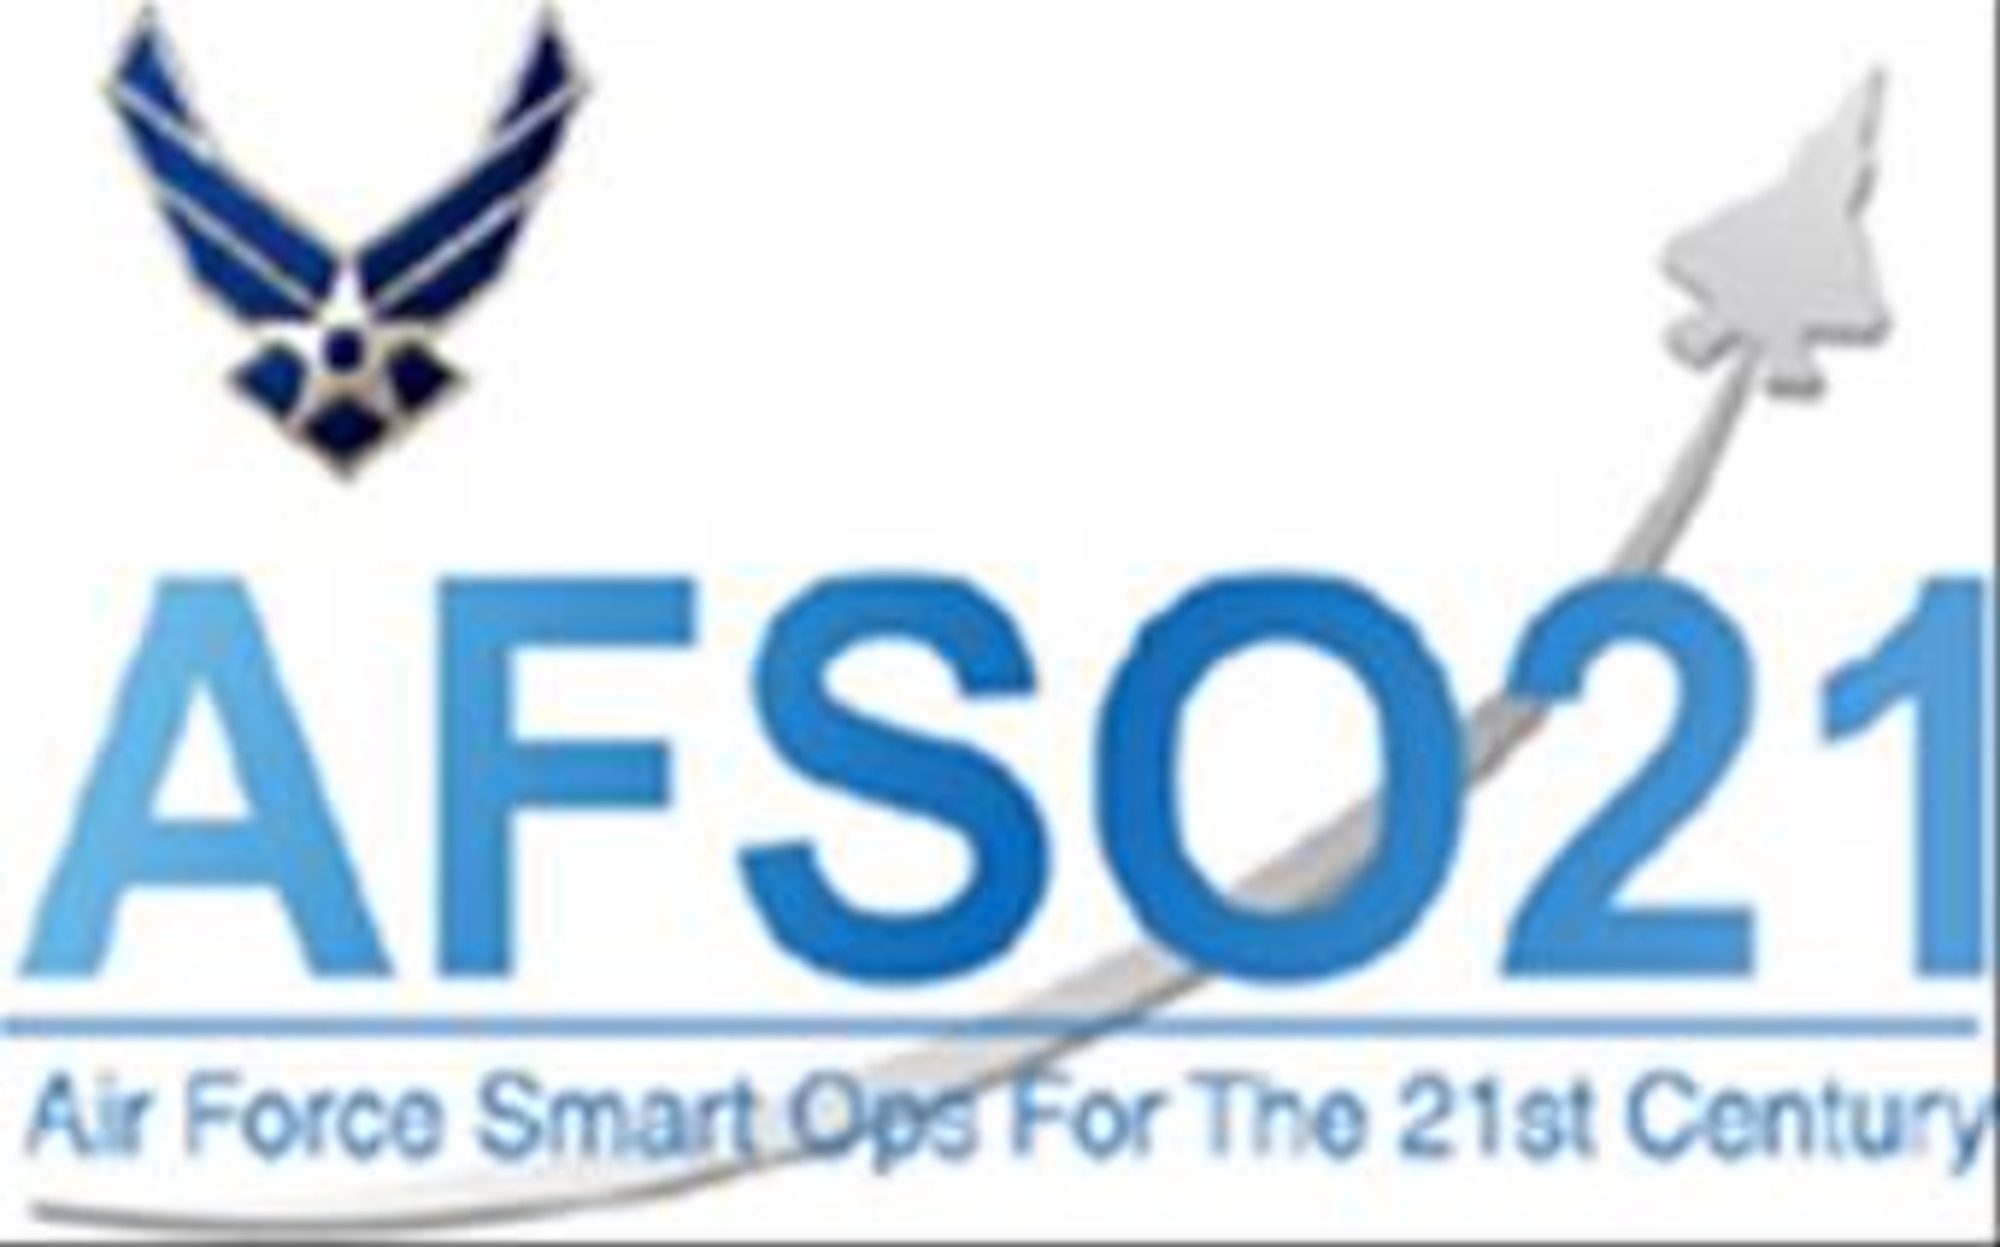 AFSO21